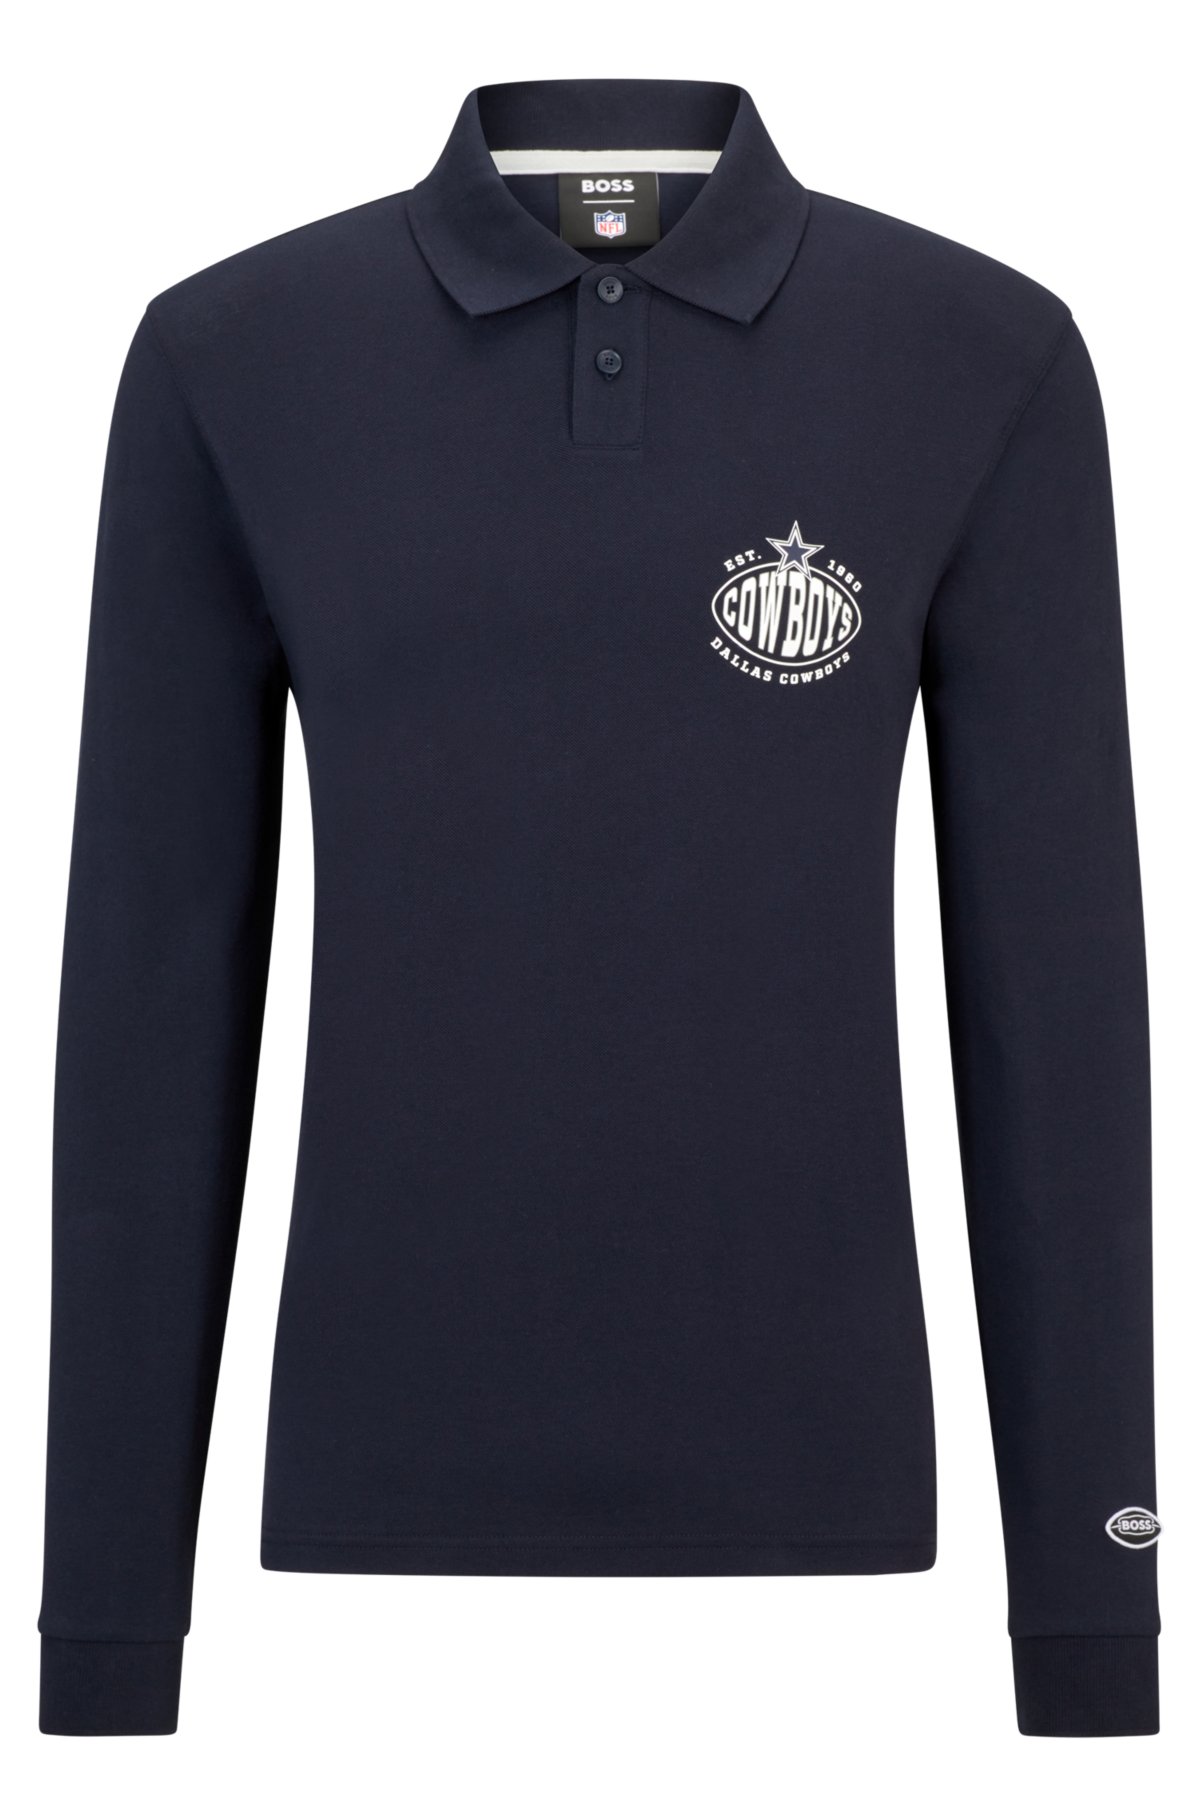 BOSS x NFL long-sleeved polo shirt with collaborative branding, Cowboys